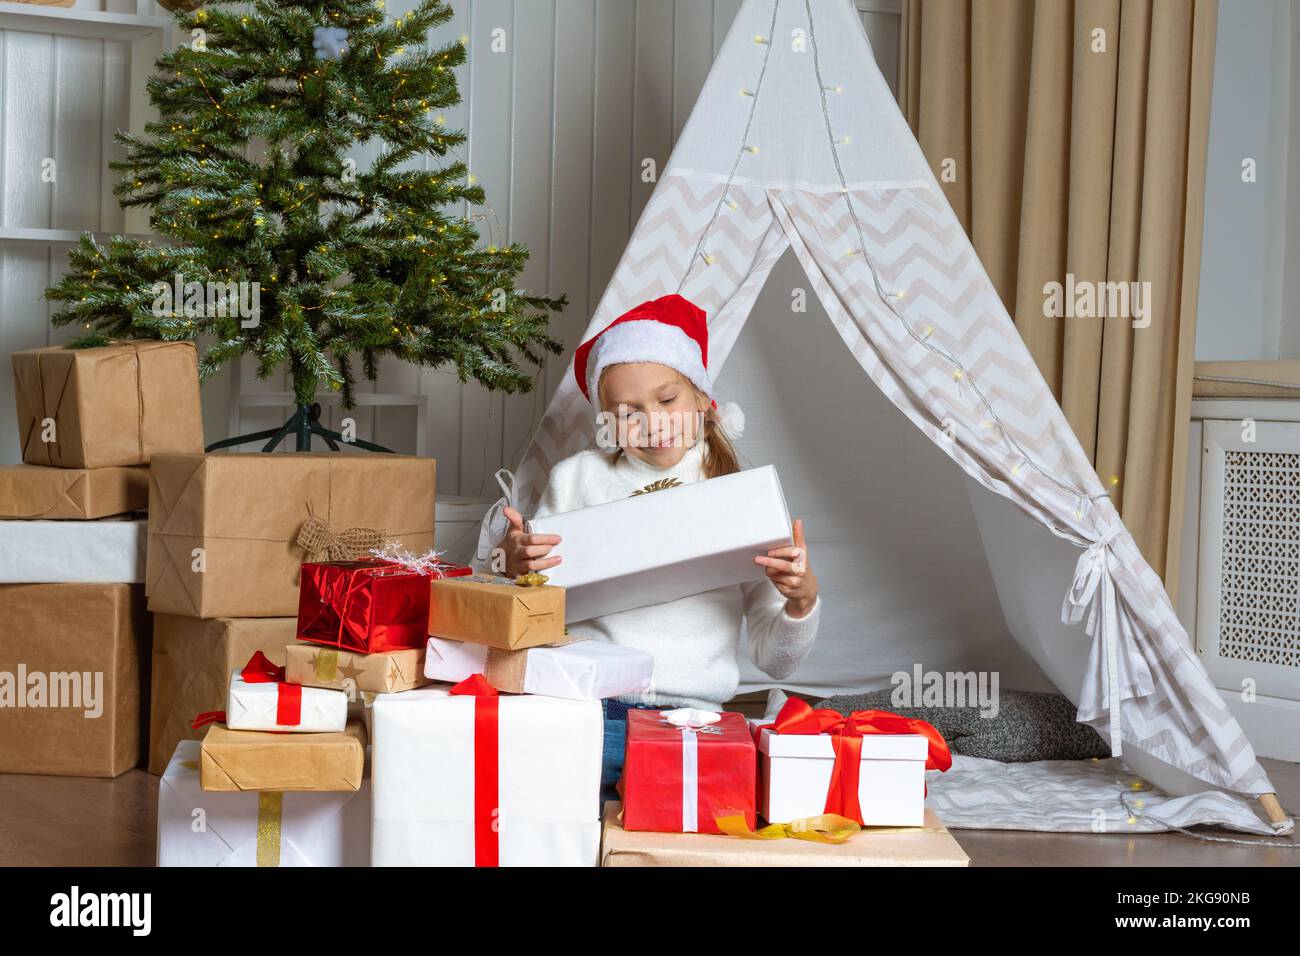 An emotional girl in a Santa hat is sitting on the floor next to a pile of her gifts in the nursery. The child is happy with gifts from Santa. The chi Stock Photo